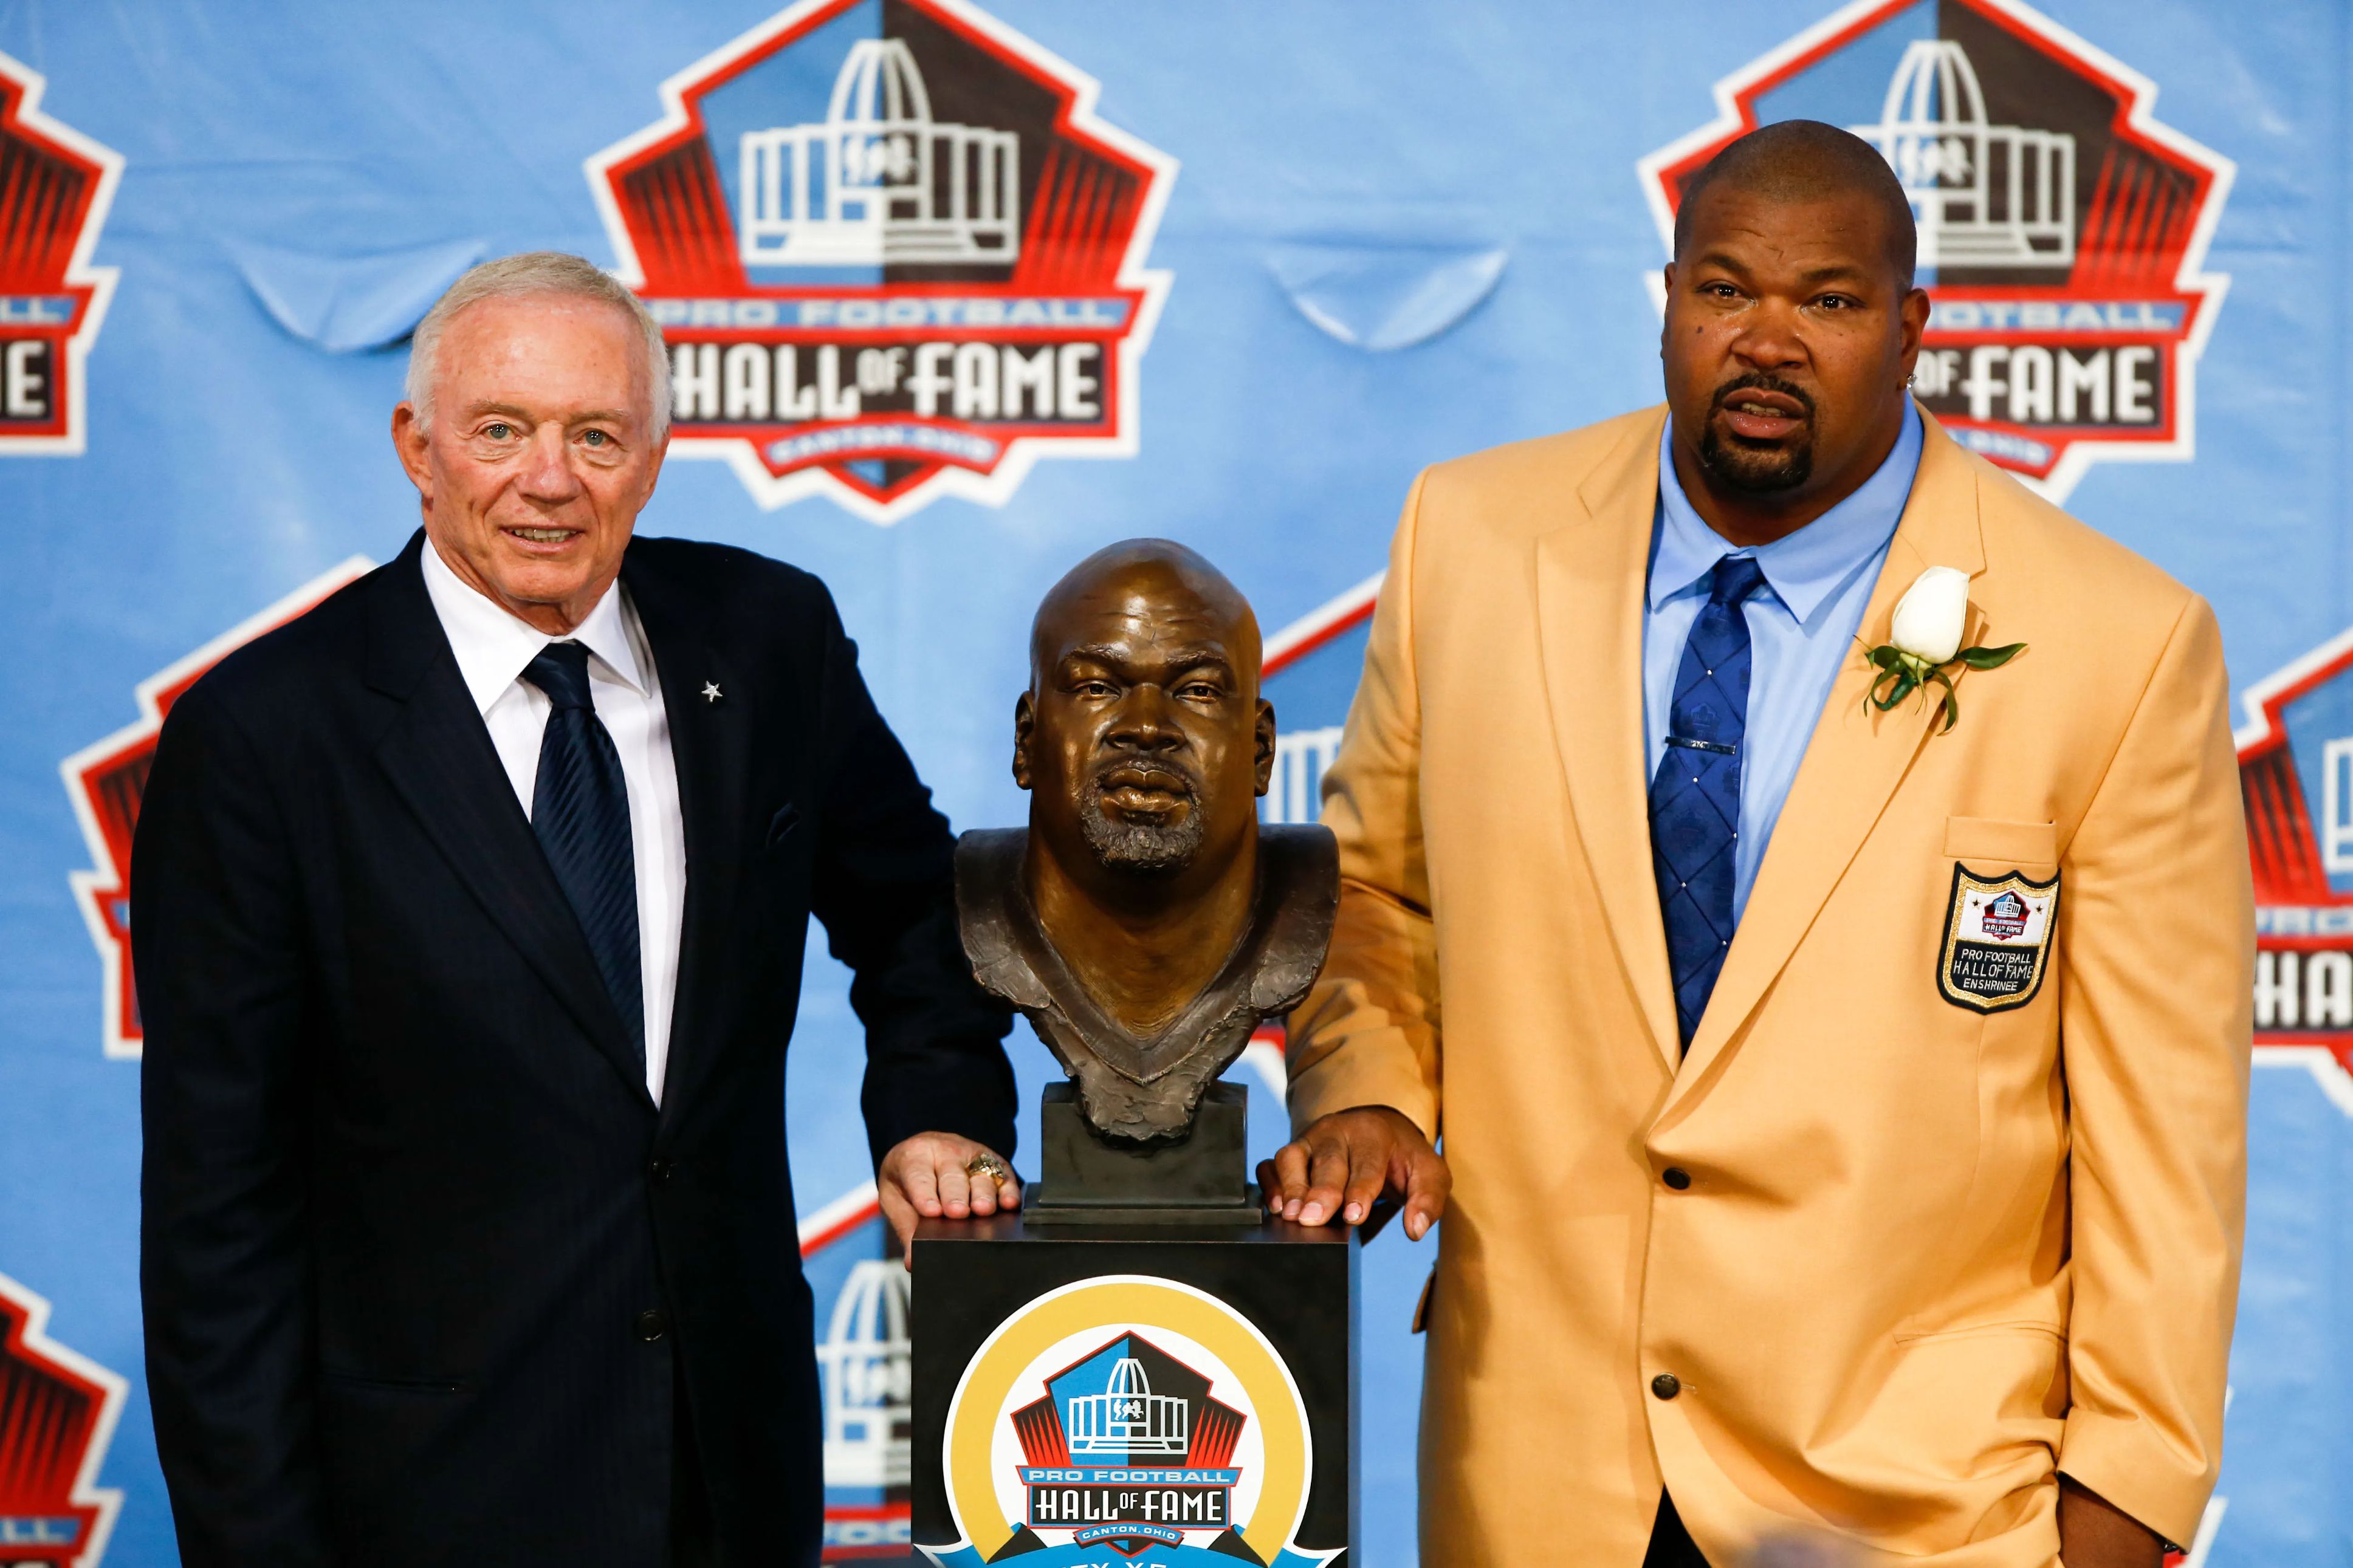 Jerry Jones taking a picture with Larry Allen